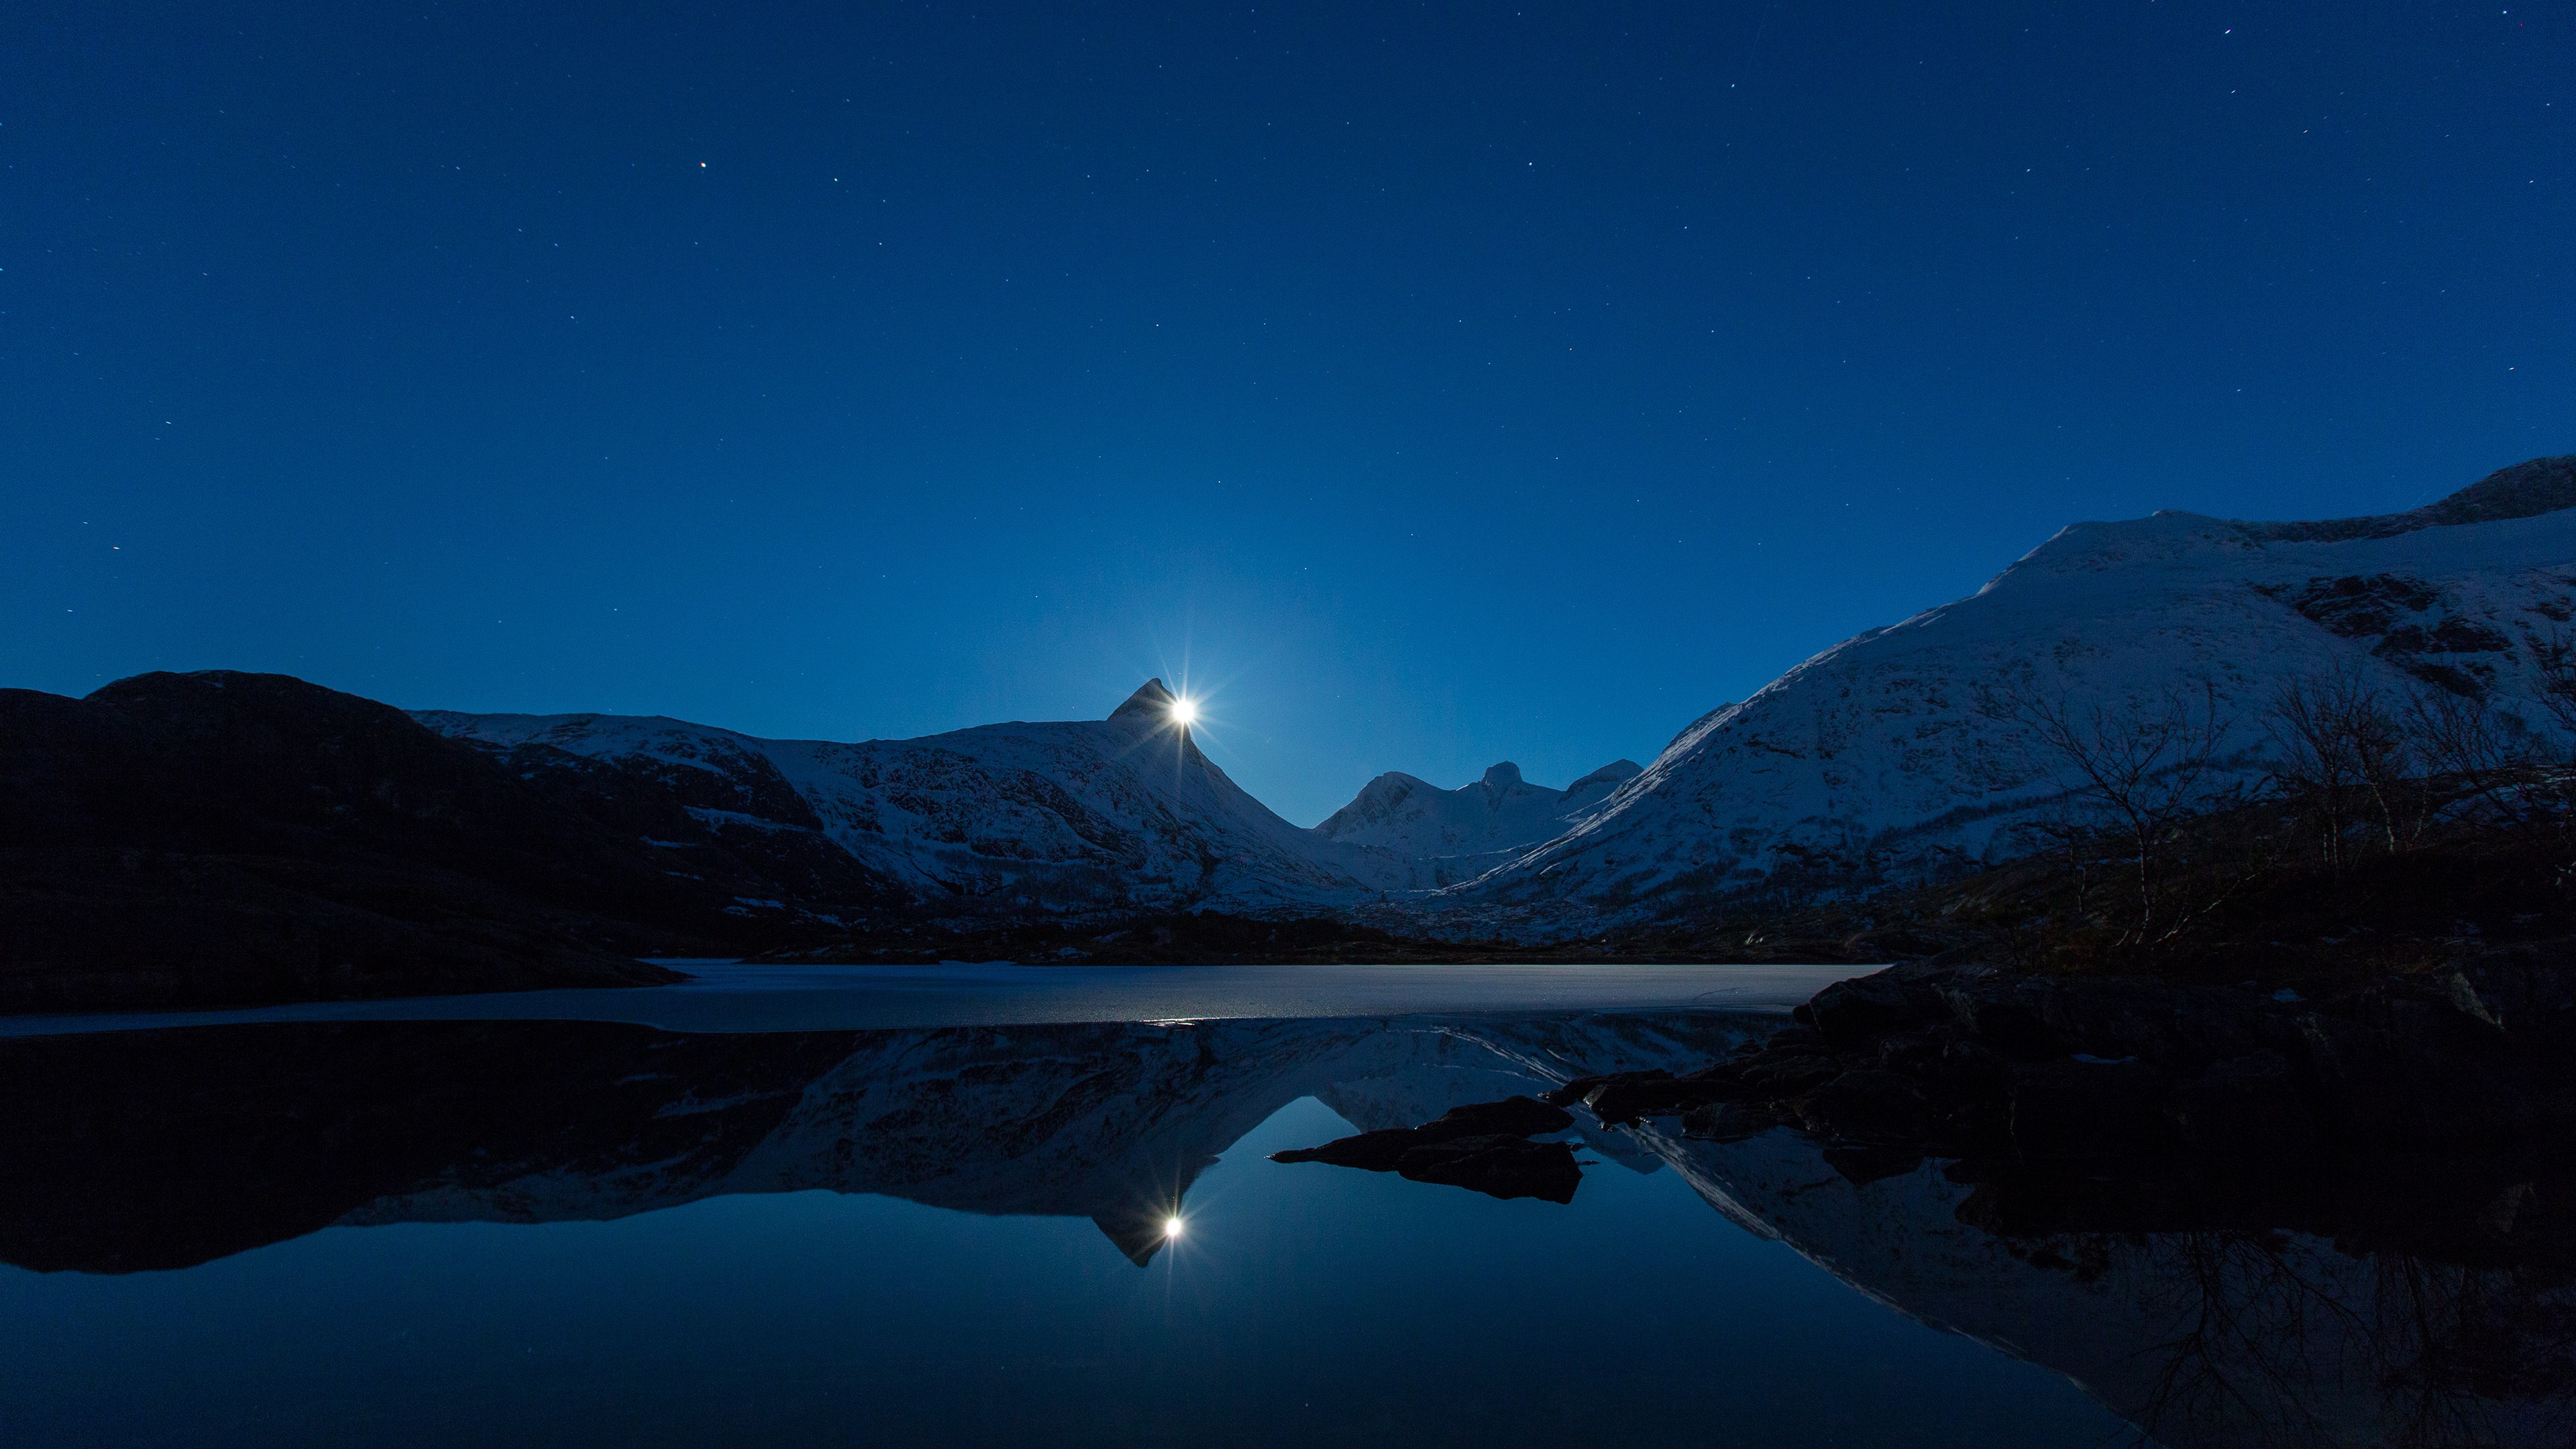 General 3840x2160 nature landscape clear sky night snow winter hills lake Moon moonlight stairs ice reflection mountains low light